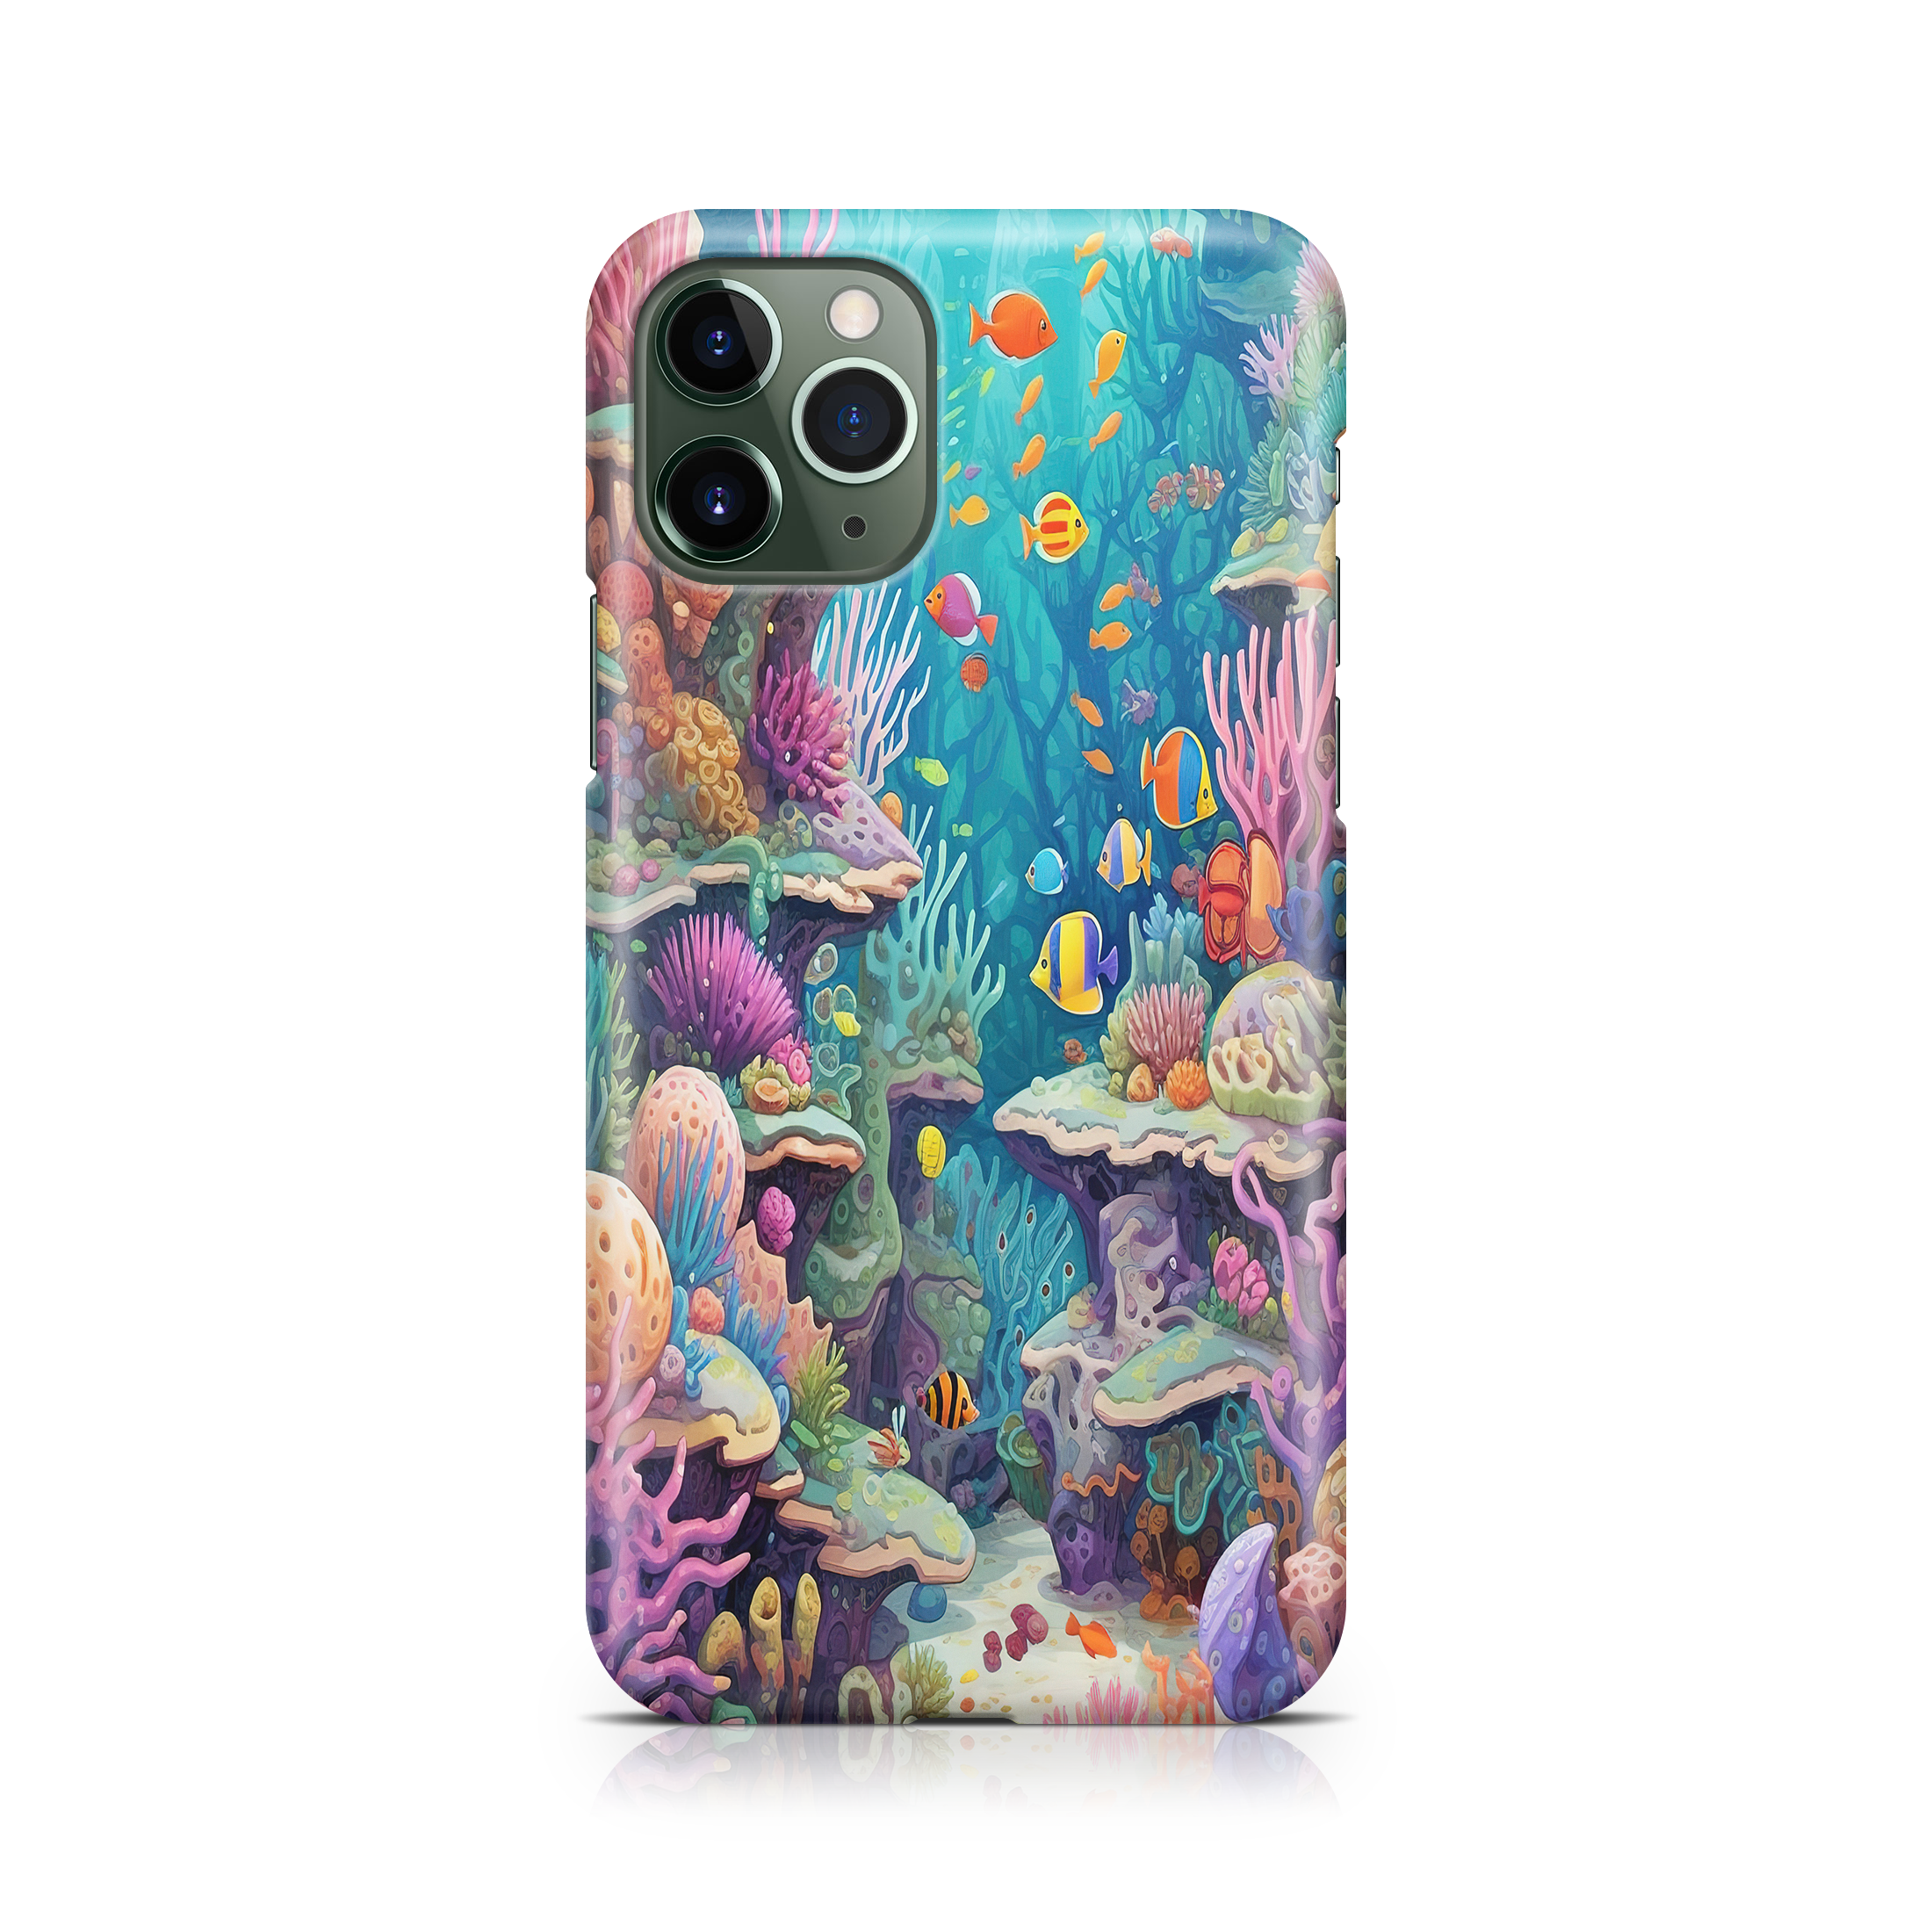 Daydream Coral - iPhone phone case designs by CaseSwagger